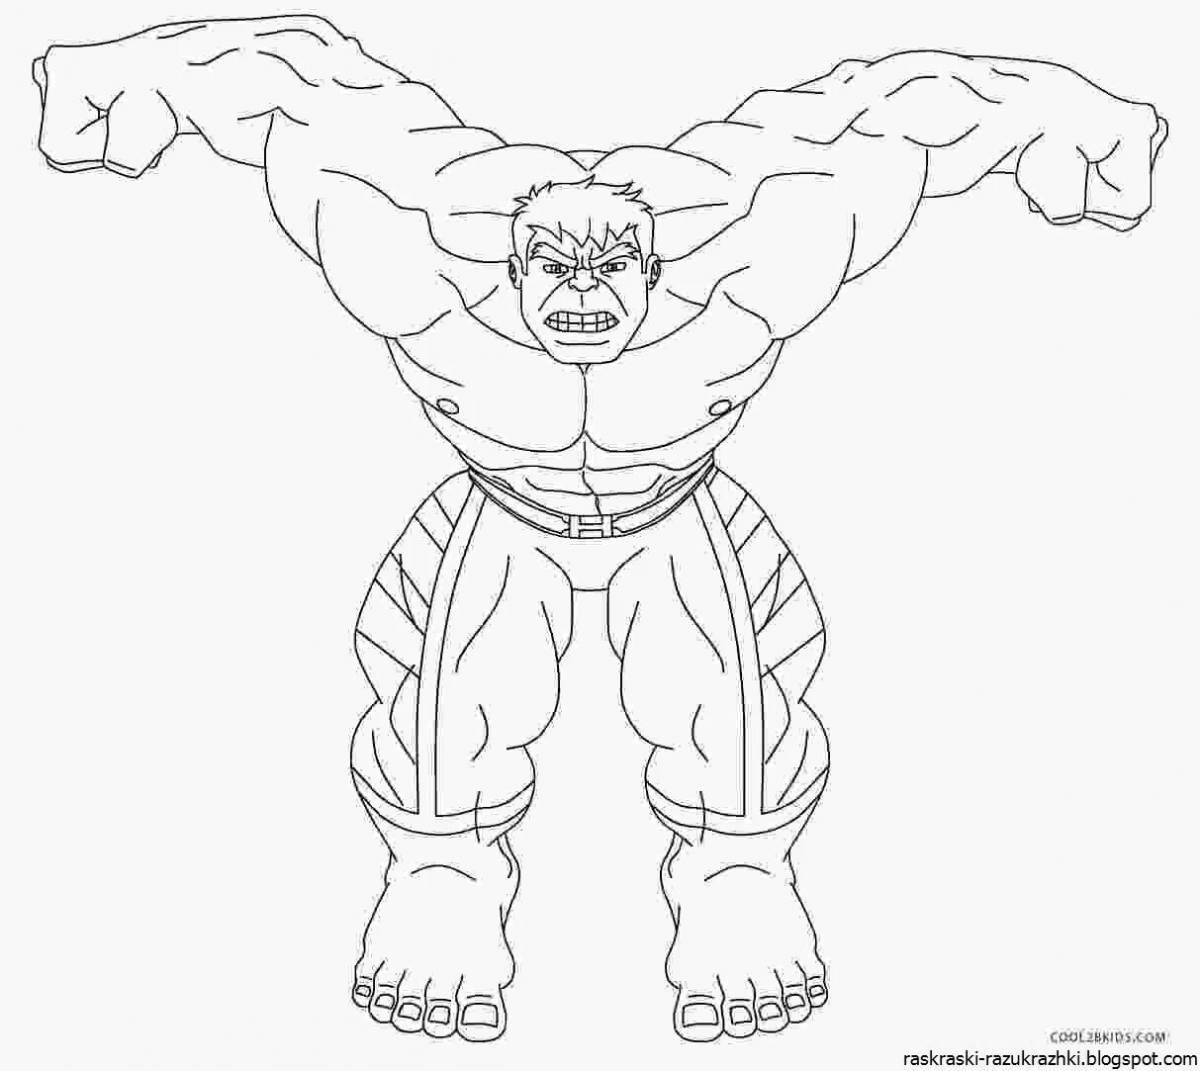 Coloring page charming hulk for children 5-6 years old